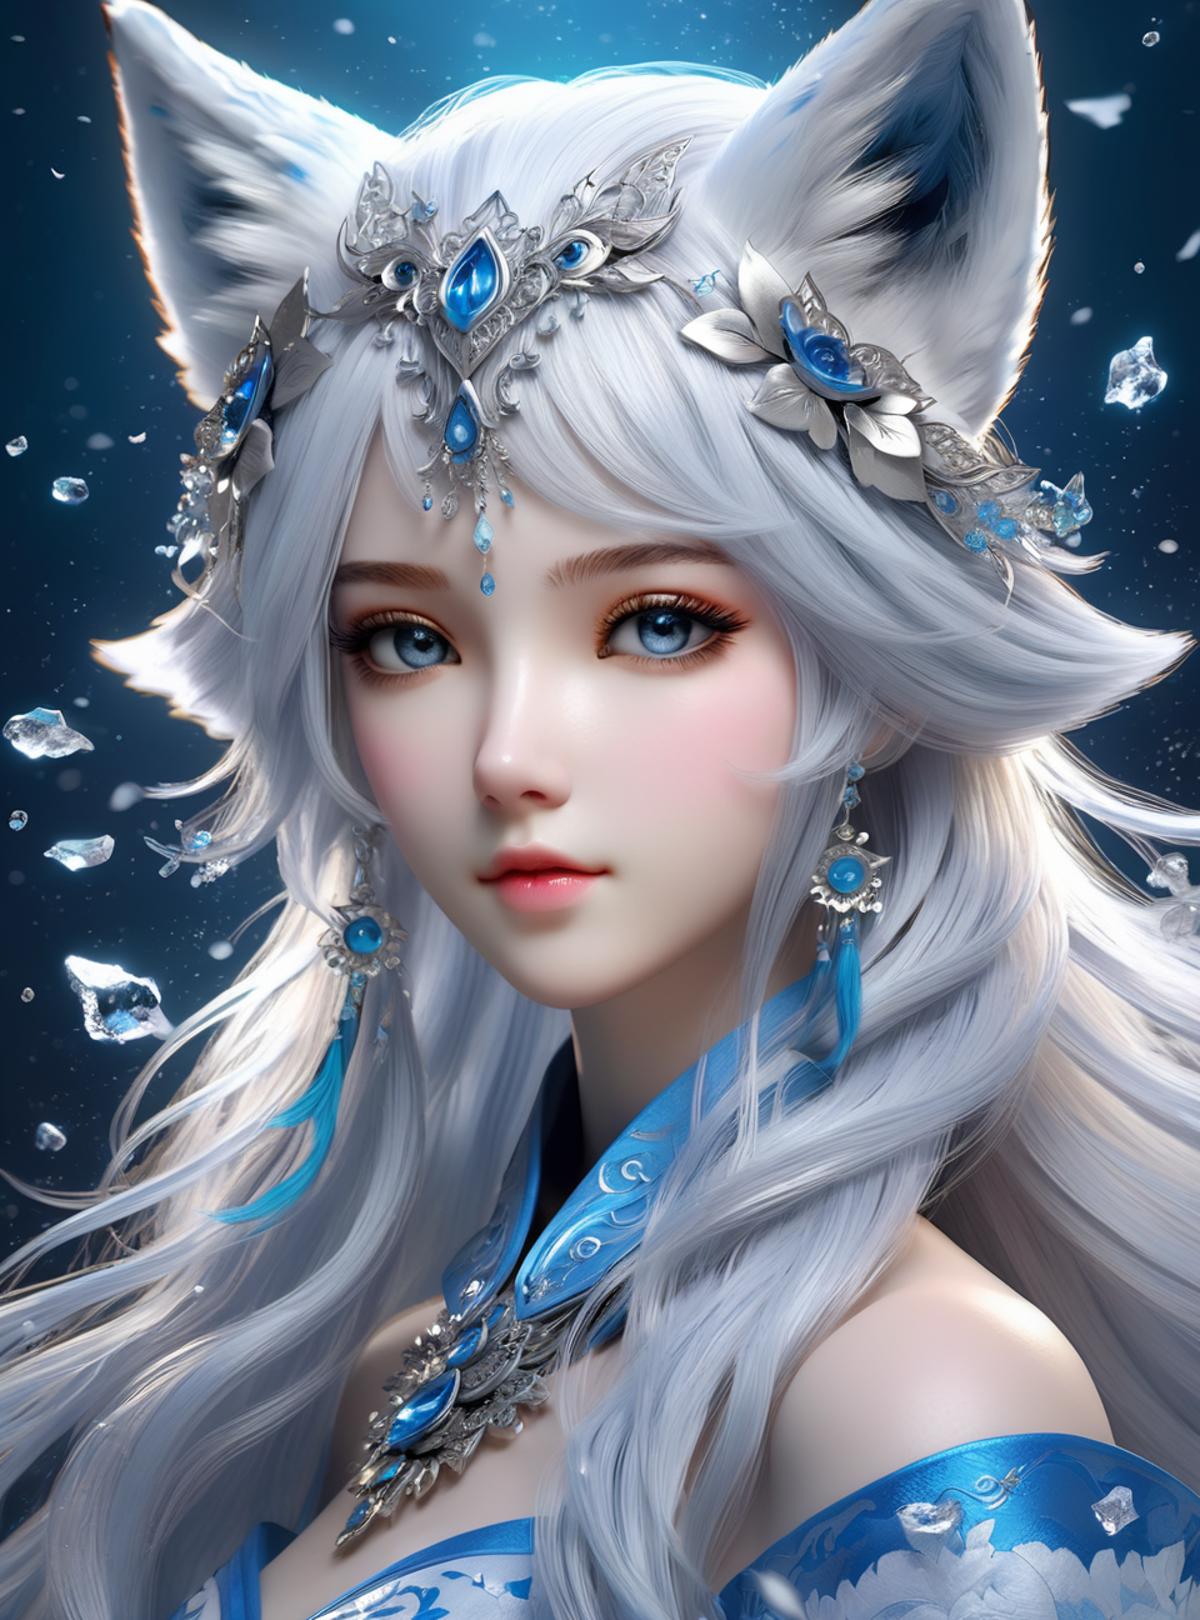 Artistic Anime Illustration of a White-Haired Girl with Blue Eyes and a Crown.